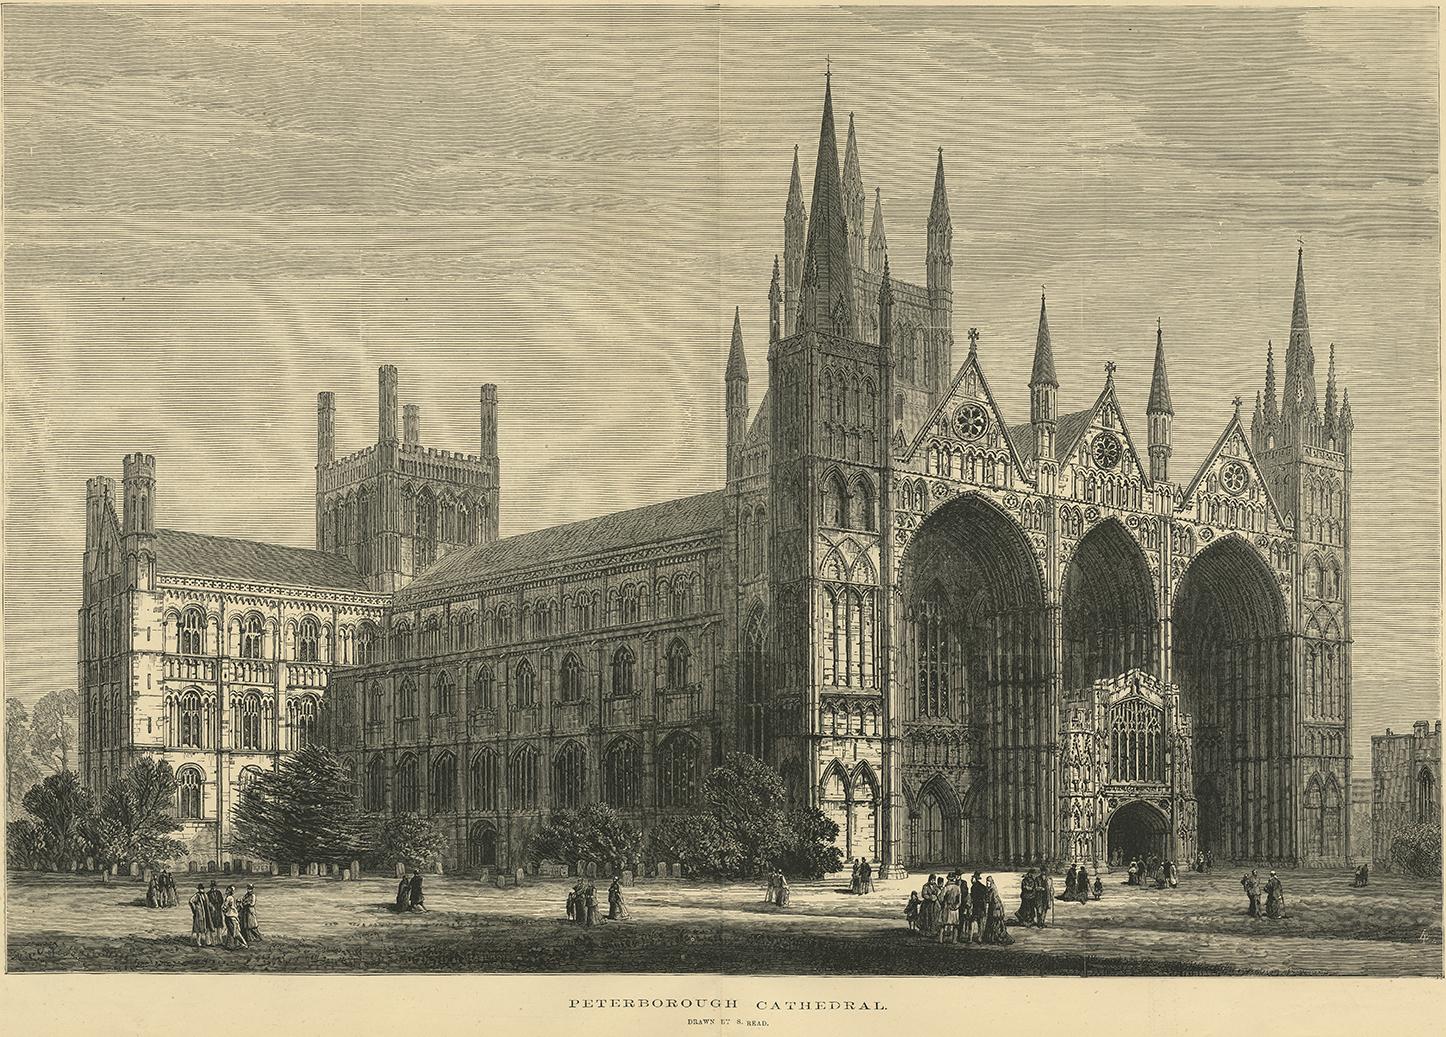 Antique print titled 'Peterborough Cathedral'. Original antique print of Peterborough Cathedral, the seat of the Anglican Bishop of Peterborough, dedicated to Saint Peter, Saint Paul and Saint Andrew, whose statues look down from the three high